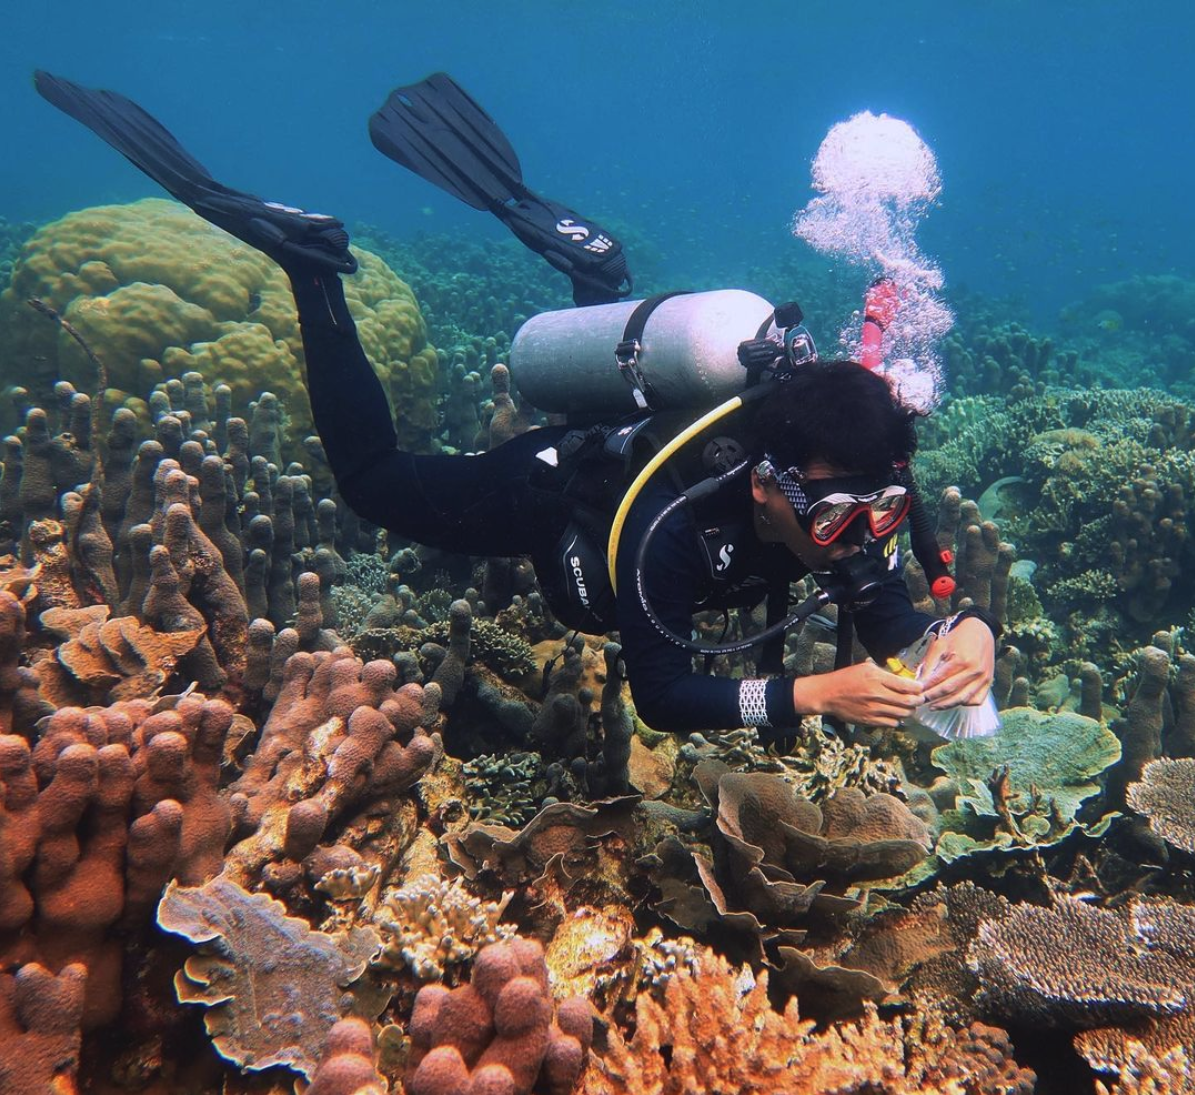 Adib Mustofa, wearing a wetsuit and scuba gear, holds measuring tools as he dives over a coral reef in Indonesia